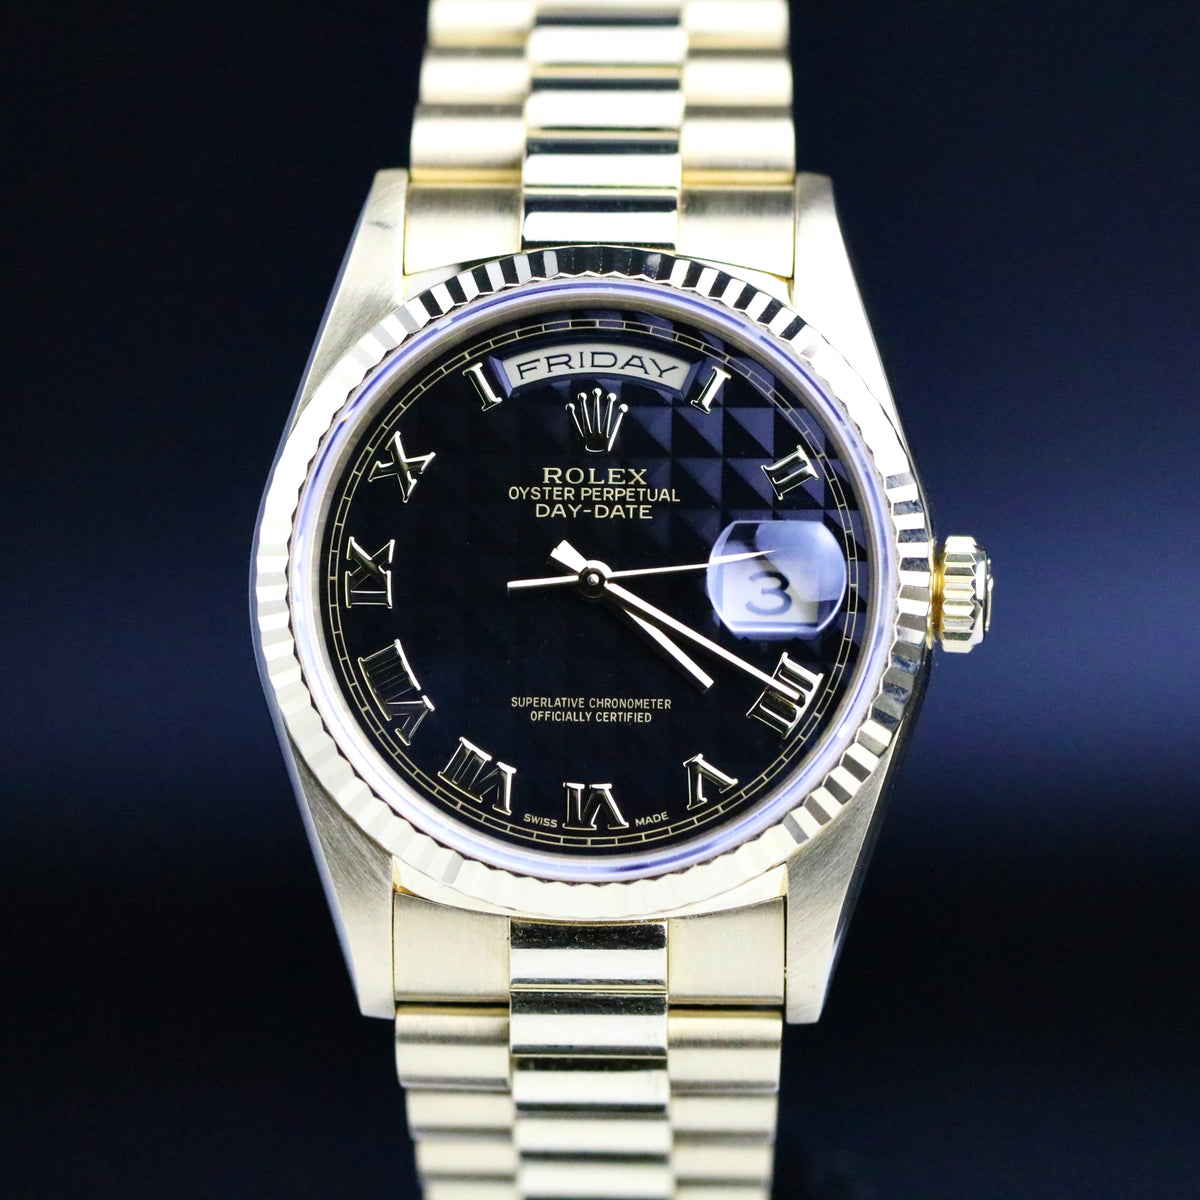 For TRADE 1994 Rolex 18238 Daydate 36mm Black Pyramid Dial with Box & RSC(2023)